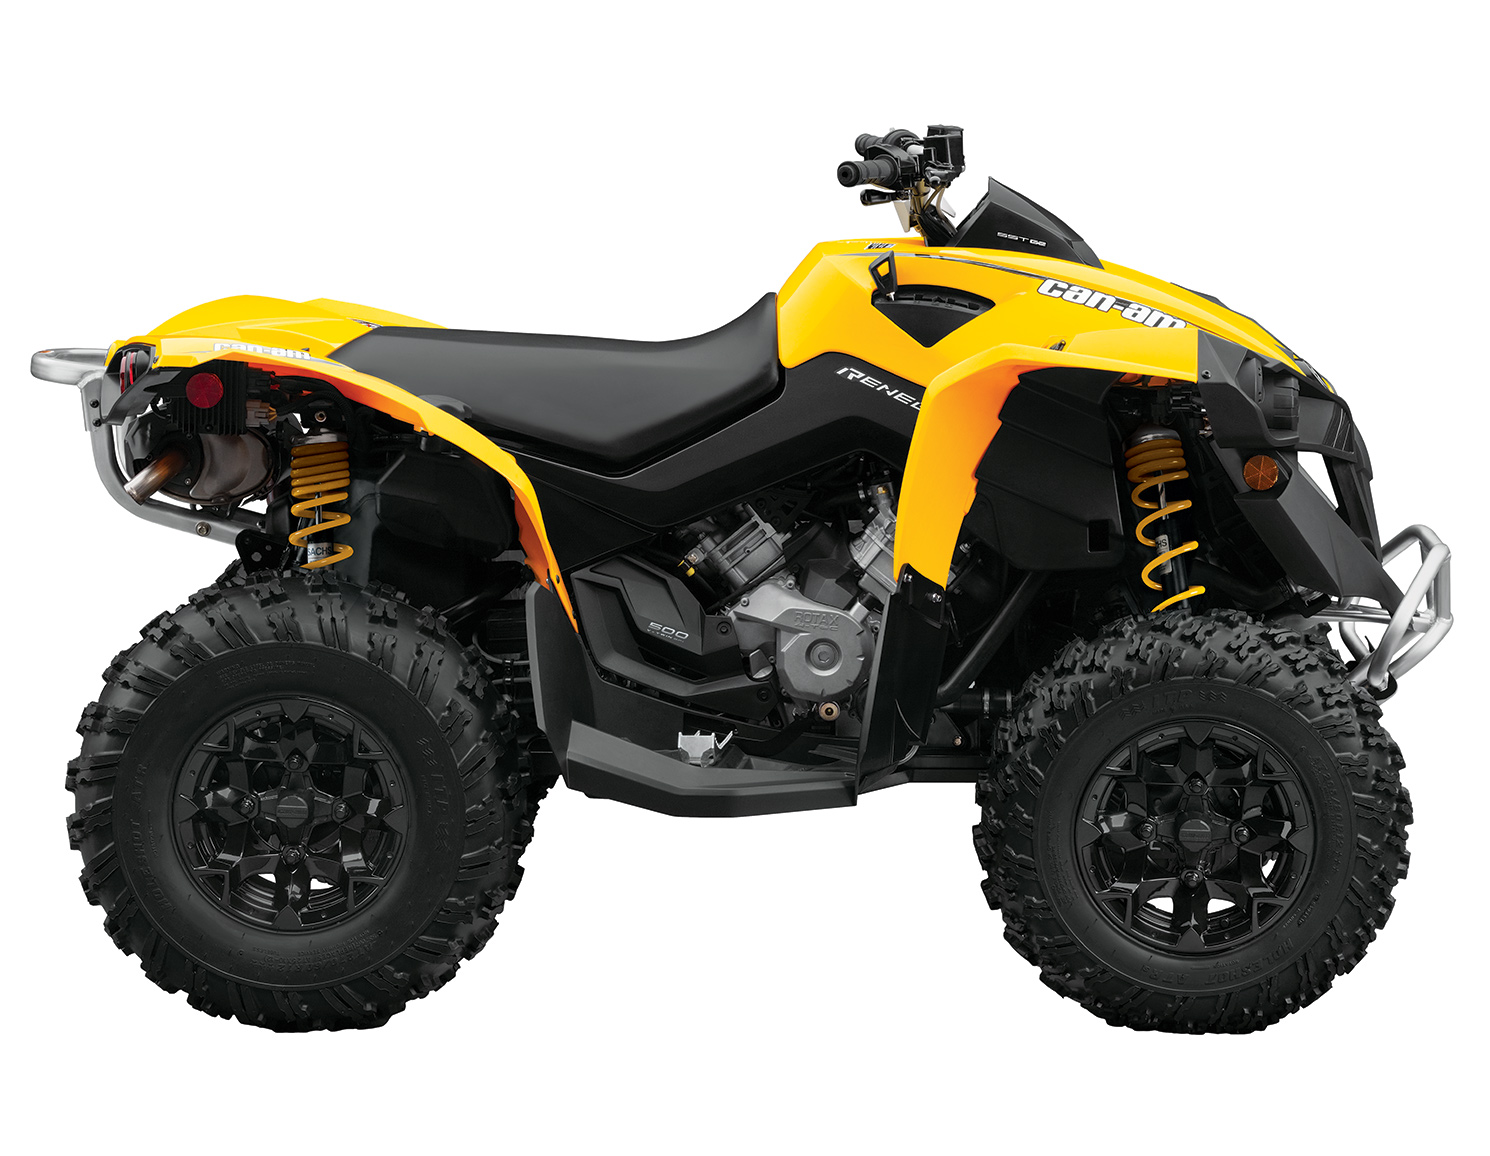  CAN-AM Renegade 500 v 2014  3 